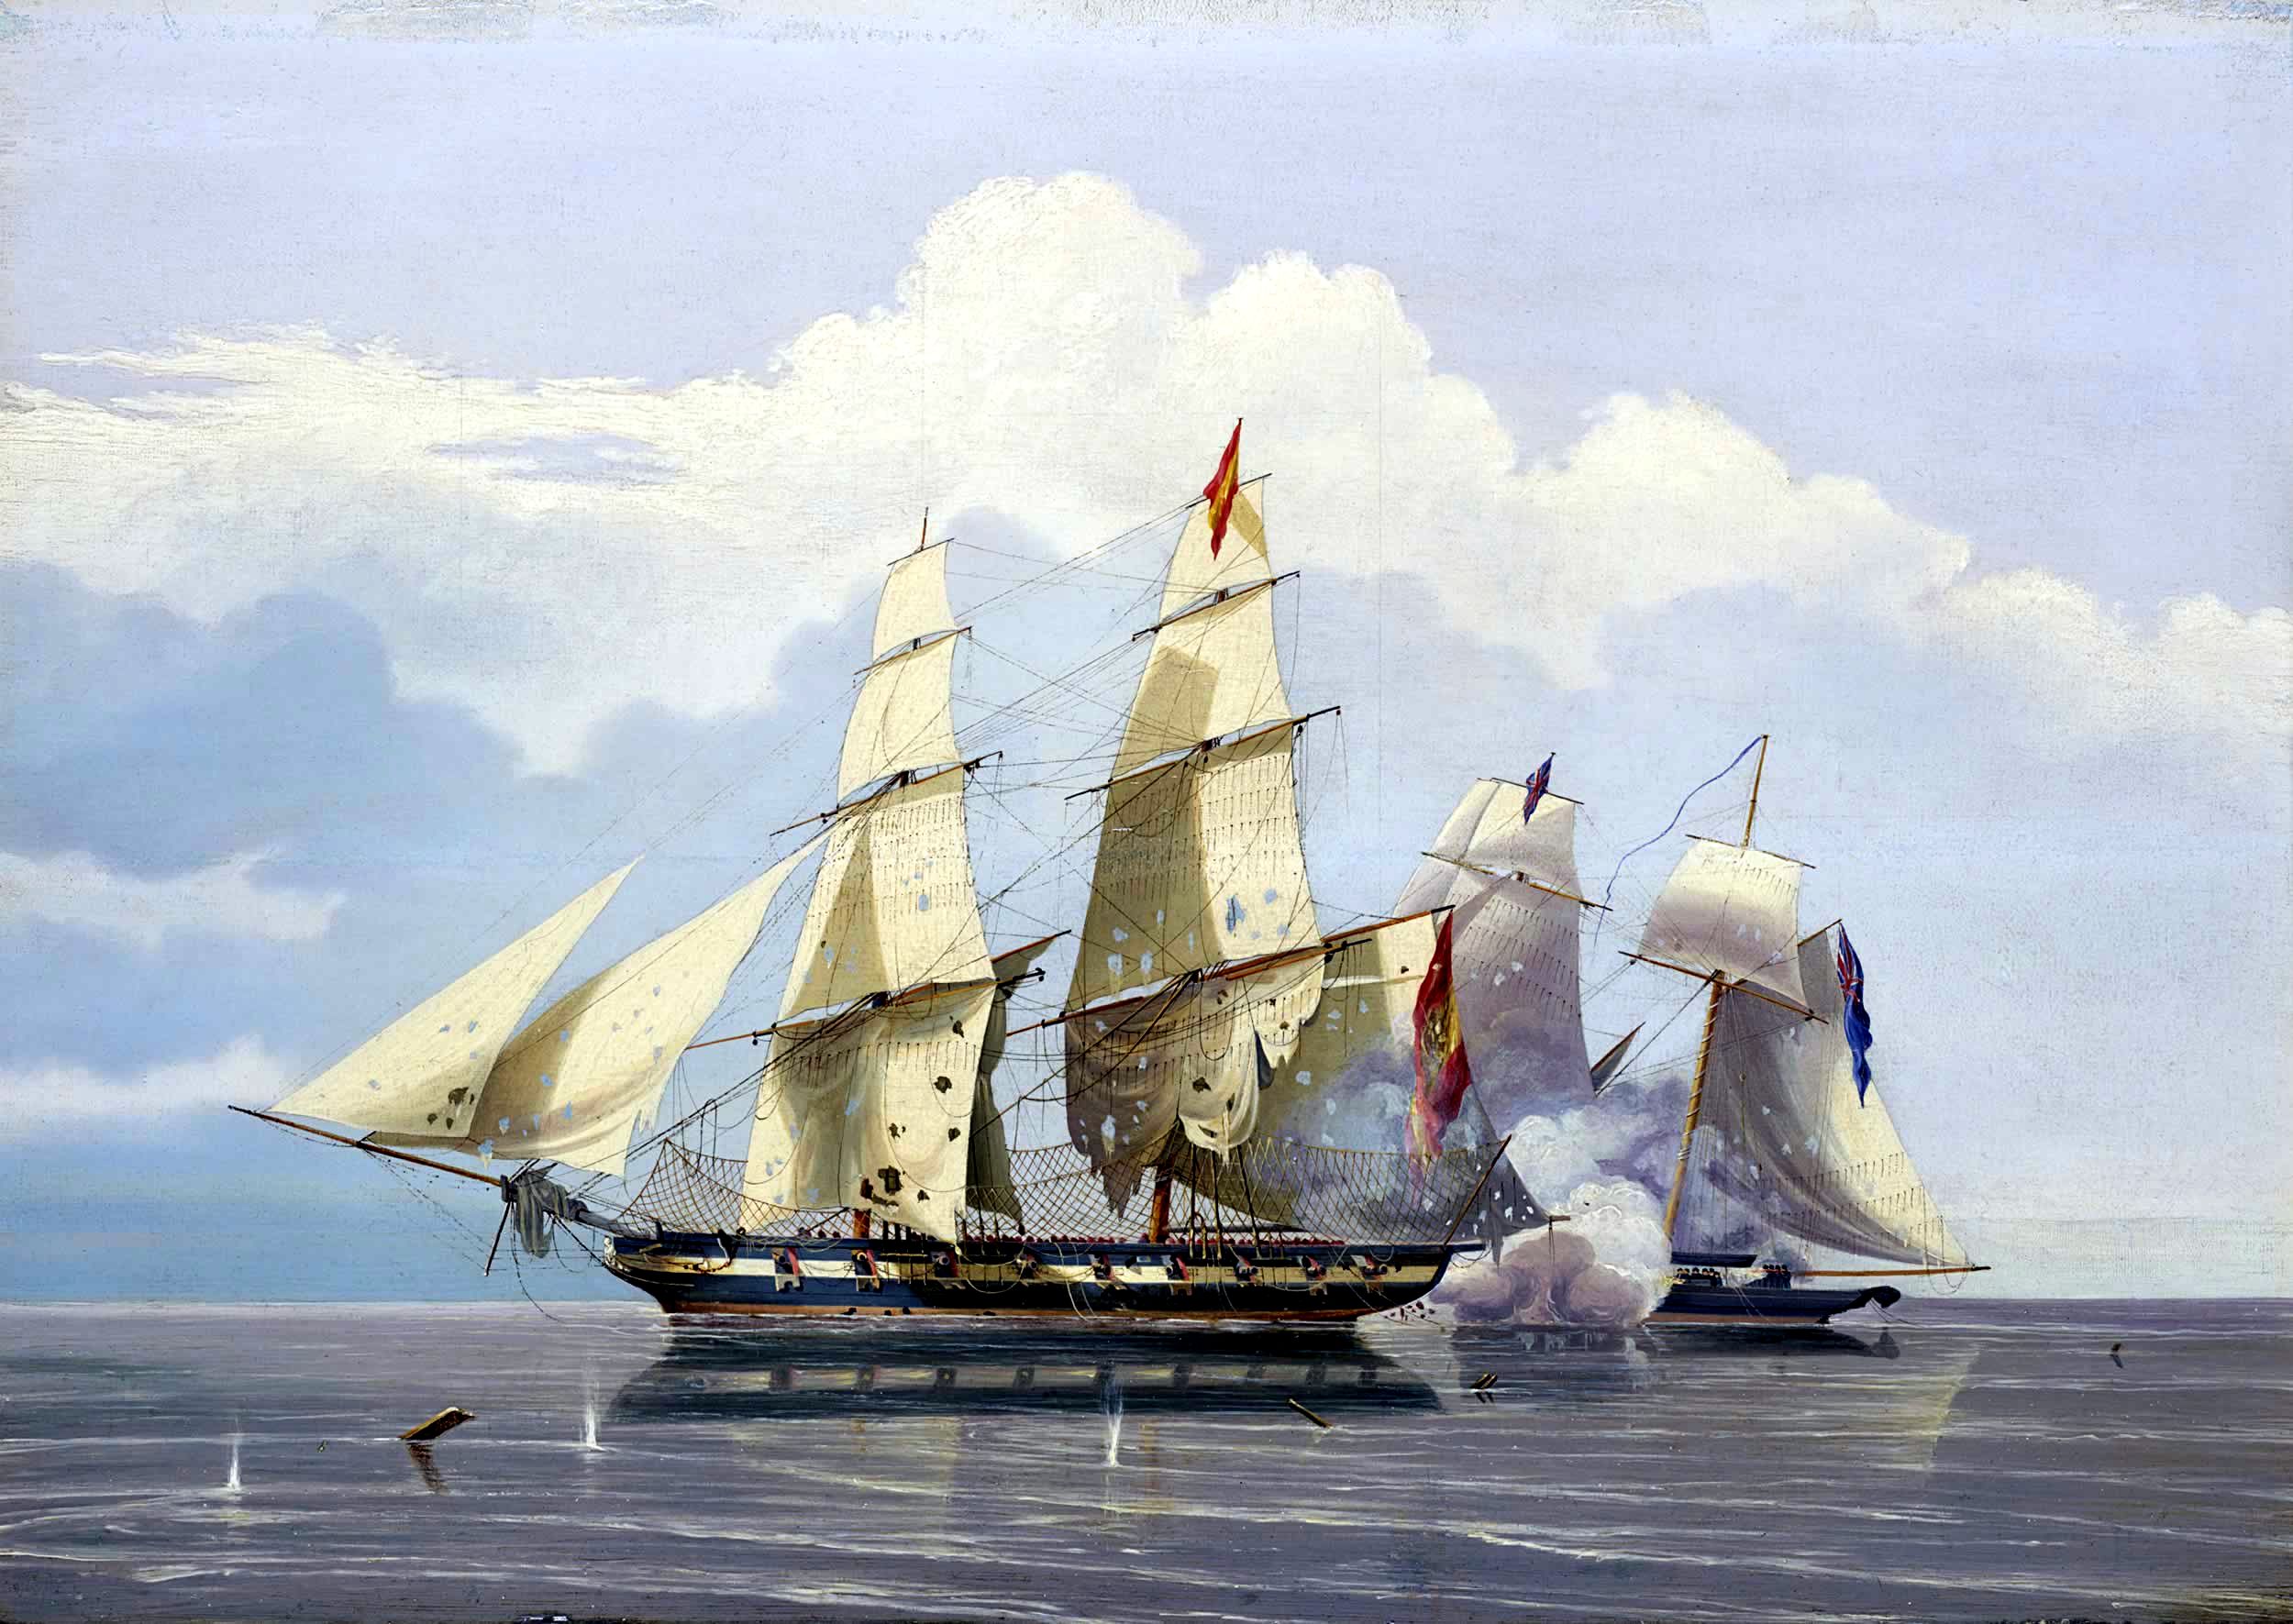 The Capture of the Slaver 'Formidable' by HMS 'Buzzard', 17 December 1834.jpg